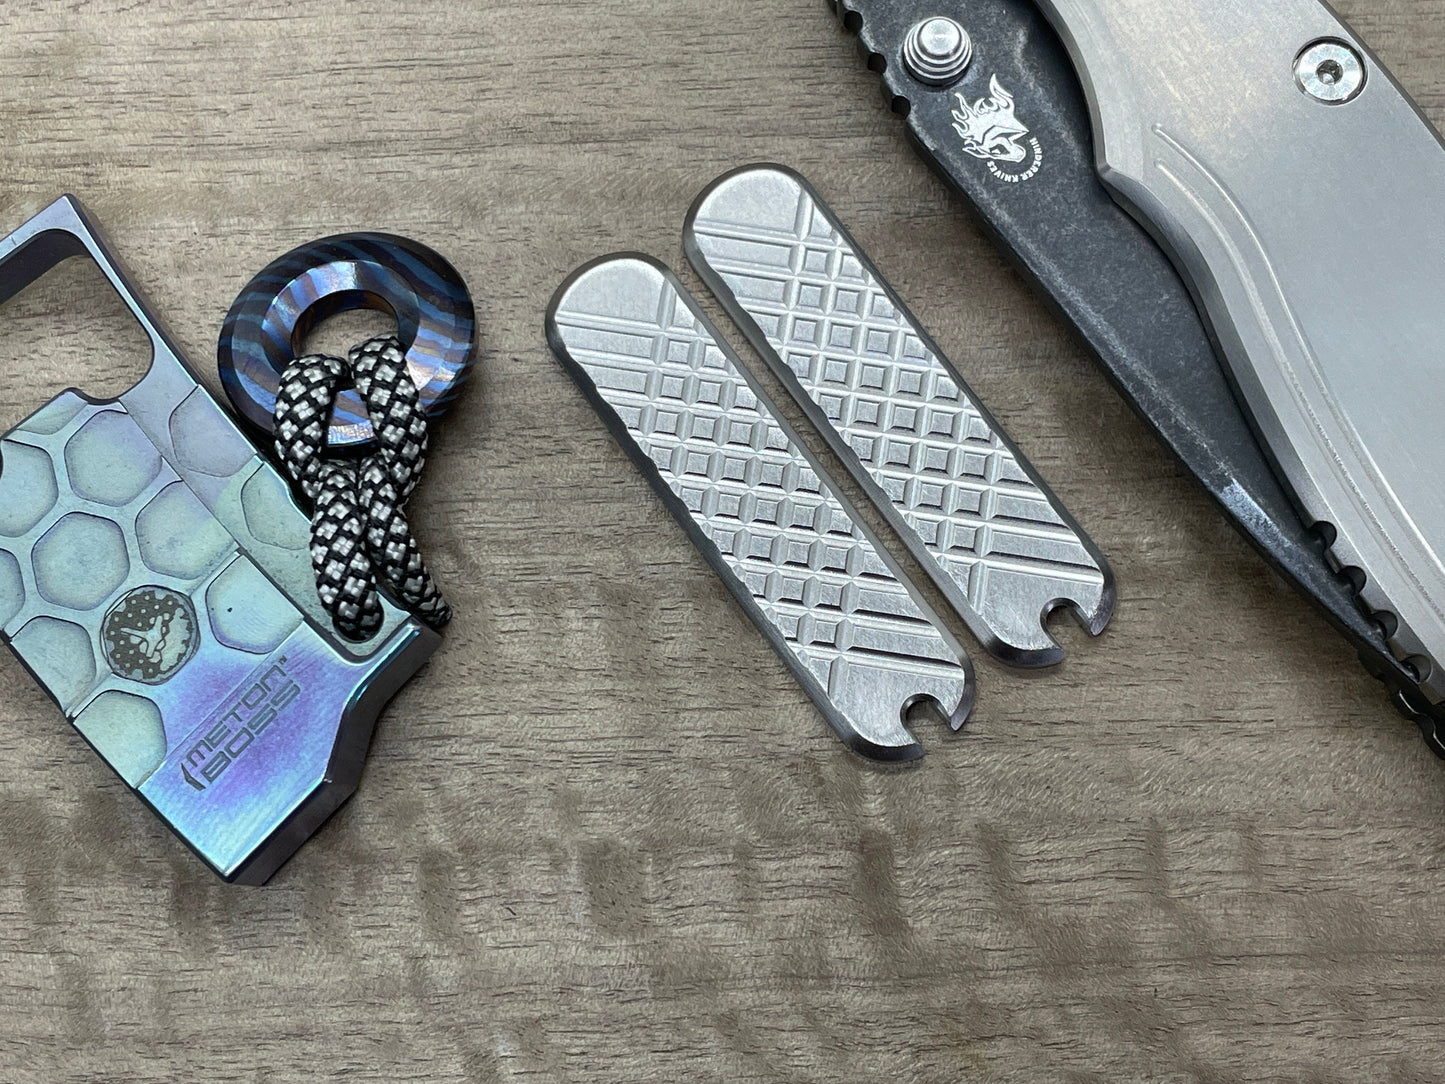 Deep Brushed FRAG Cnc milled 58mm Titanium Scales for Swiss Army SAK